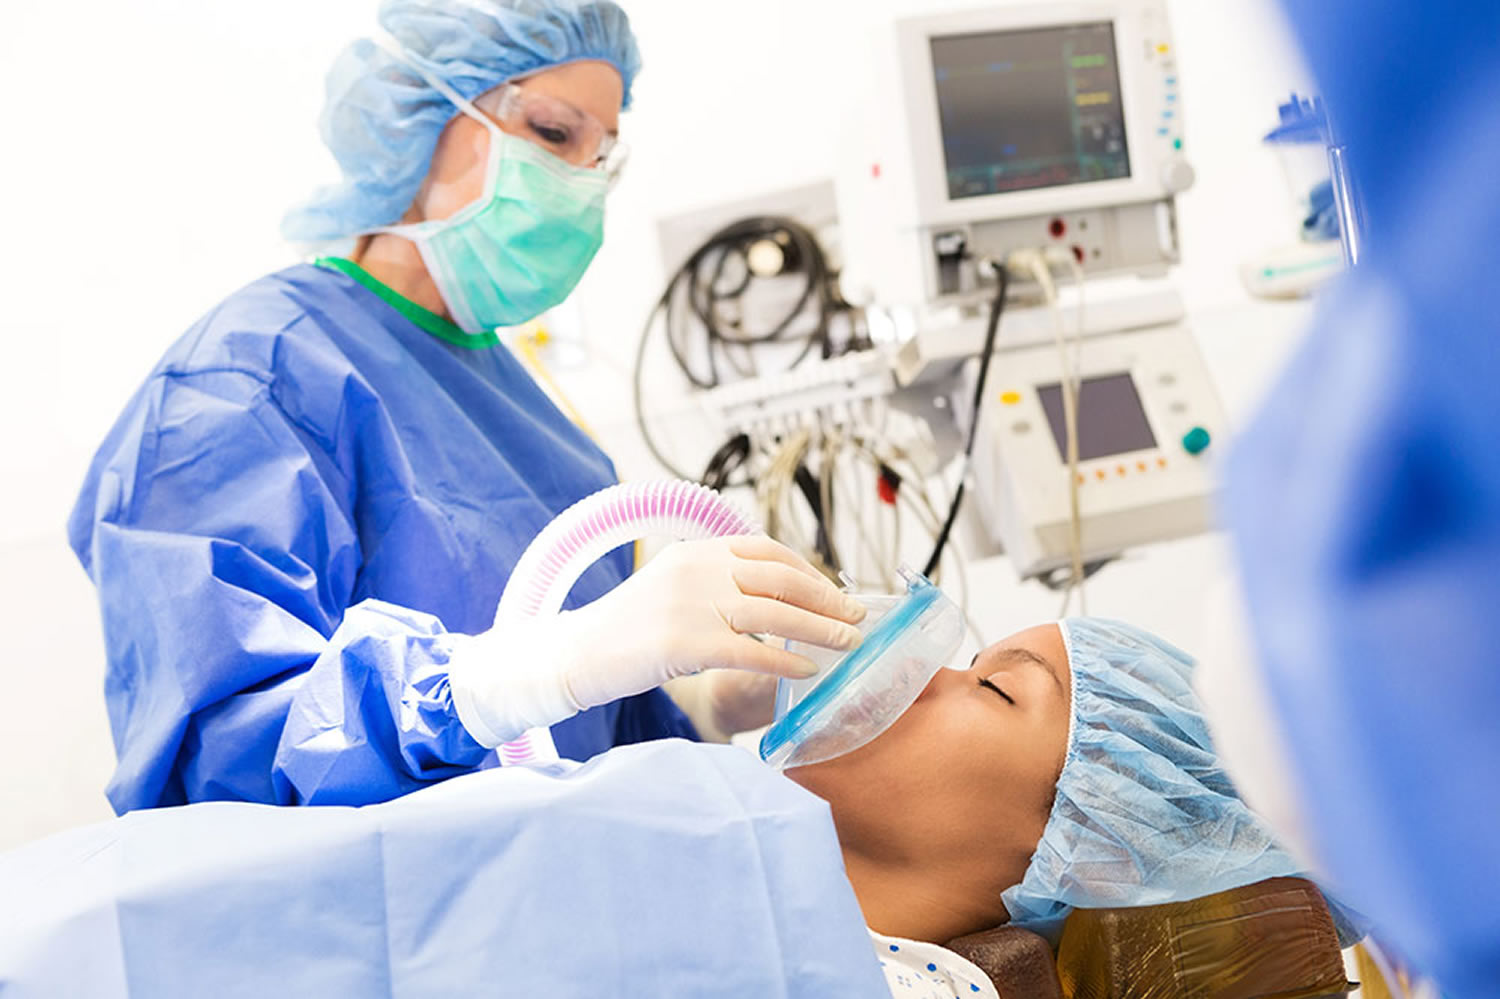 General Anesthesia Types, Risks, Drugs, Side Effects & How It Works